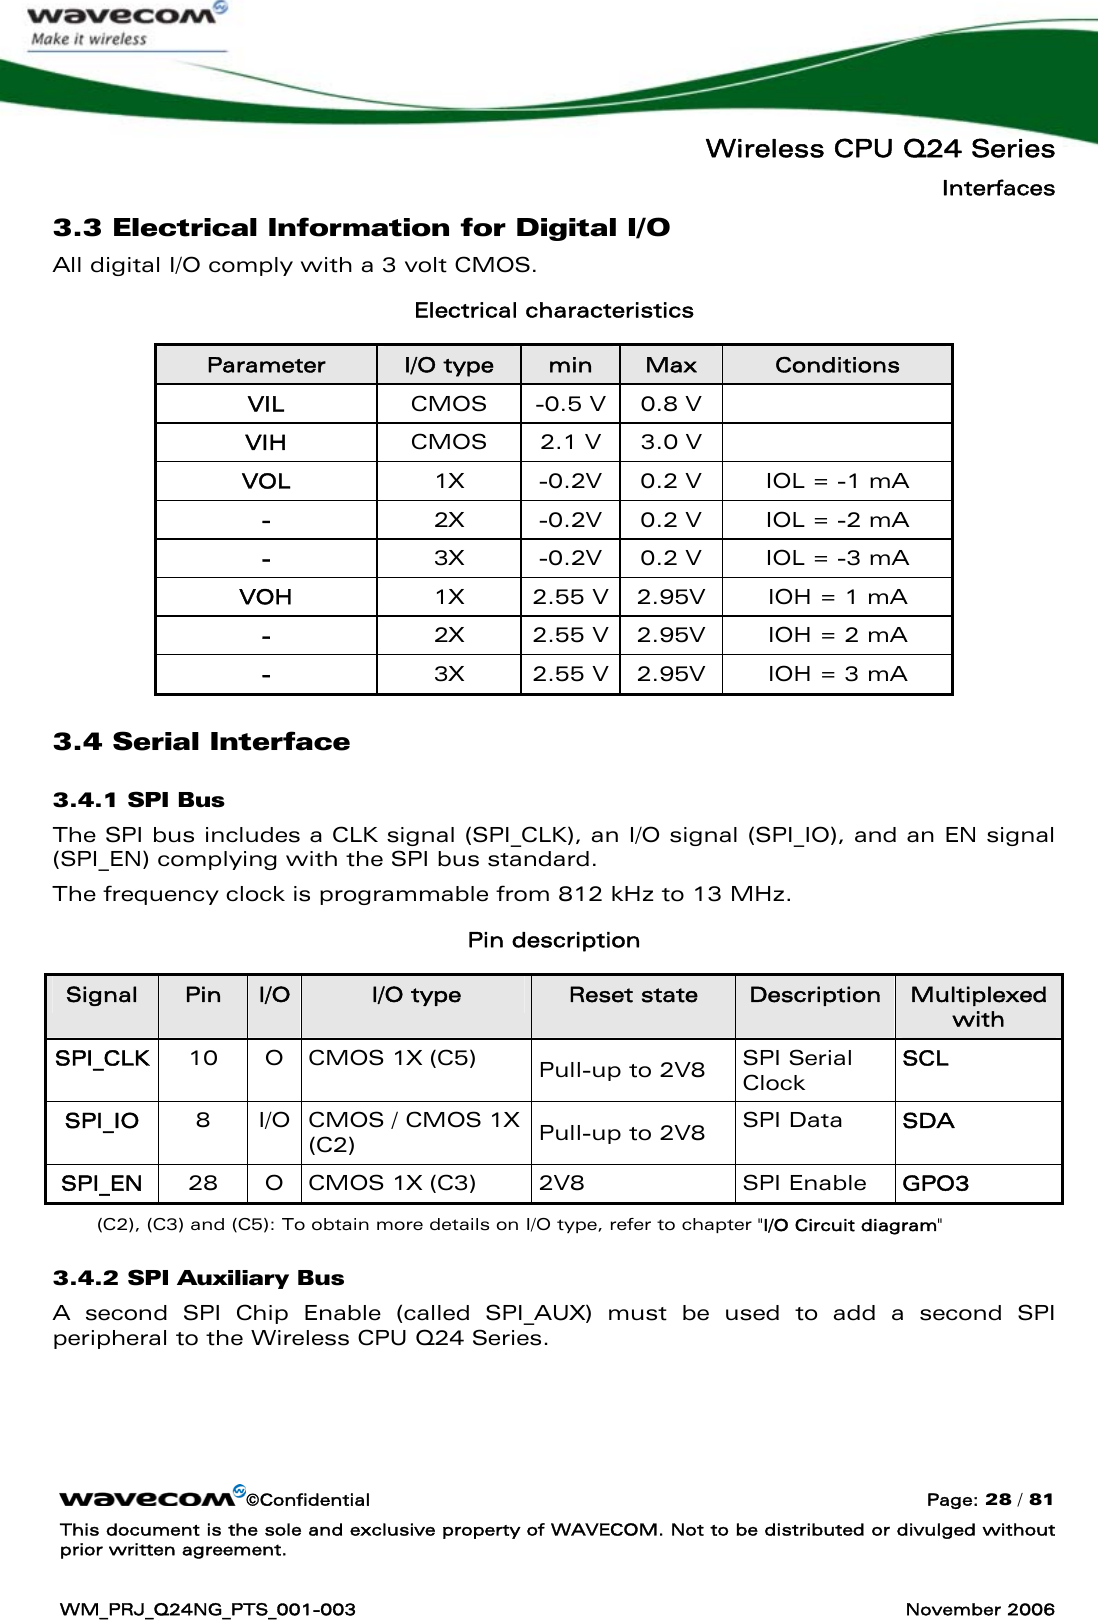   Wireless CPU Q24 Series Interfaces ©Confidential  Page: 28 / 81 This document is the sole and exclusive property of WAVECOM. Not to be distributed or divulged without prior written agreement.  WM_PRJ_Q24NG_PTS_001-003  November 2006  3.3 Electrical Information for Digital I/O All digital I/O comply with a 3 volt CMOS. Electrical characteristics Parameter  I/O type  min  Max  Conditions VIL  CMOS  -0.5 V  0.8 V   VIH  CMOS  2.1 V  3.0 V   VOL  1X  -0.2V  0.2 V  IOL = -1 mA -  2X  -0.2V  0.2 V  IOL = -2 mA -  3X  -0.2V  0.2 V  IOL = -3 mA VOH  1X 2.55 V 2.95V  IOH = 1 mA -  2X 2.55 V 2.95V  IOH = 2 mA -  3X 2.55 V 2.95V  IOH = 3 mA 3.4 Serial Interface 3.4.1 SPI Bus  The SPI bus includes a CLK signal (SPI_CLK), an I/O signal (SPI_IO), and an EN signal (SPI_EN) complying with the SPI bus standard.  The frequency clock is programmable from 812 kHz to 13 MHz. Pin description Signal  Pin  I/O  I/O type  Reset state  Description  Multiplexed with SPI_CLK  10  O  CMOS 1X (C5)  Pull-up to 2V8  SPI Serial Clock SCL SPI_IO  8  I/O  CMOS / CMOS 1X (C2)  Pull-up to 2V8  SPI Data  SDA SPI_EN  28  O  CMOS 1X (C3)  2V8  SPI Enable  GPO3 (C2), (C3) and (C5): To obtain more details on I/O type, refer to chapter &quot;I/O Circuit diagram&quot; 3.4.2 SPI Auxiliary Bus  A second SPI Chip Enable (called SPI_AUX) must be used to add a second SPI peripheral to the Wireless CPU Q24 Series. 